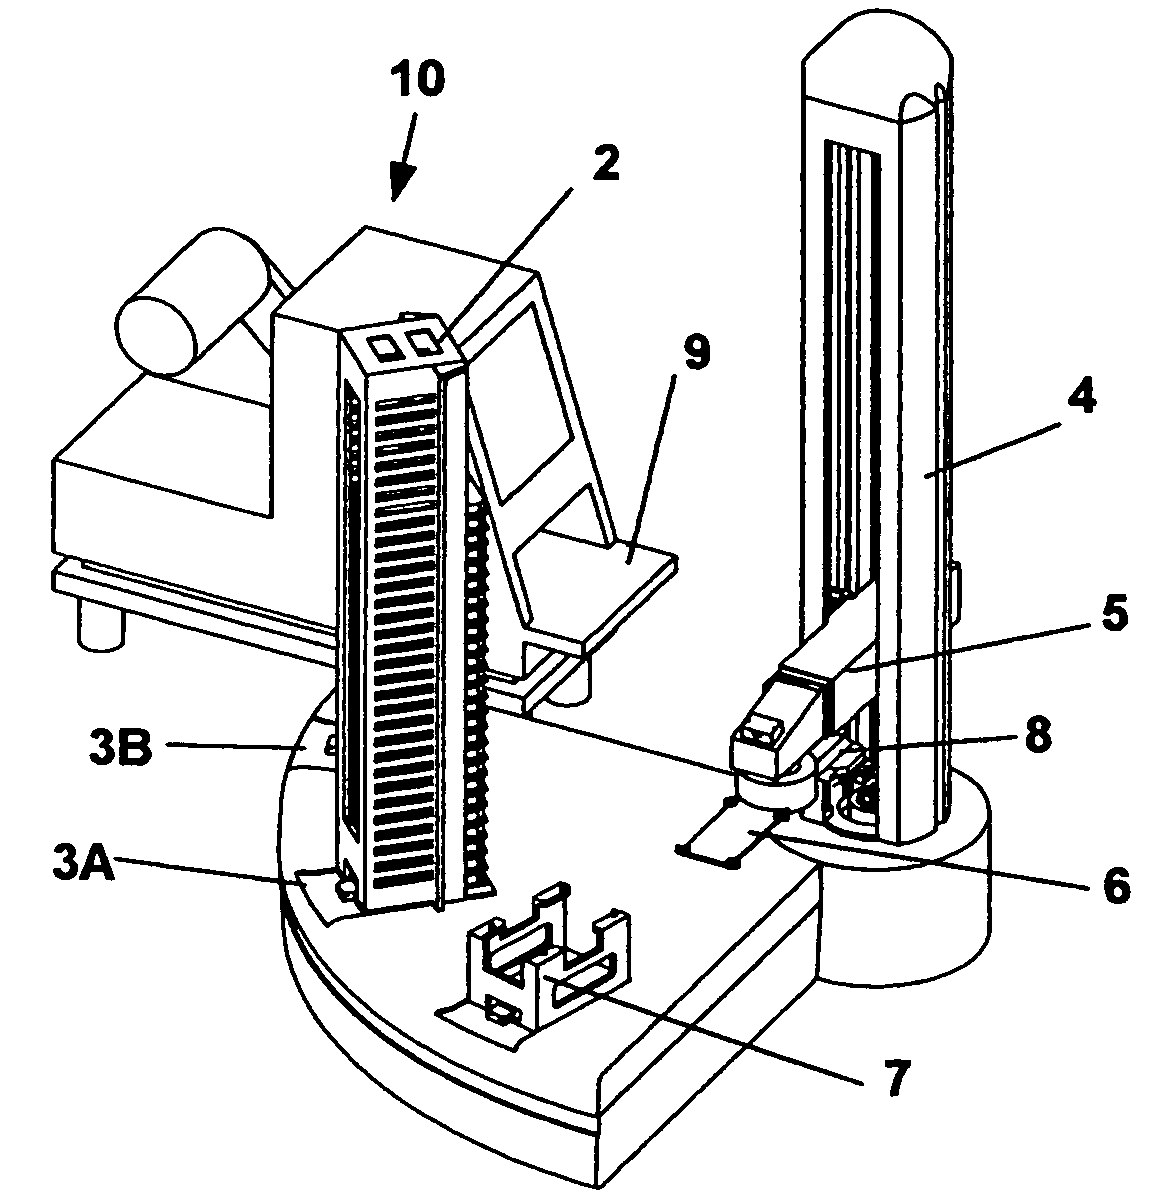 Automated micro-well plate handling device